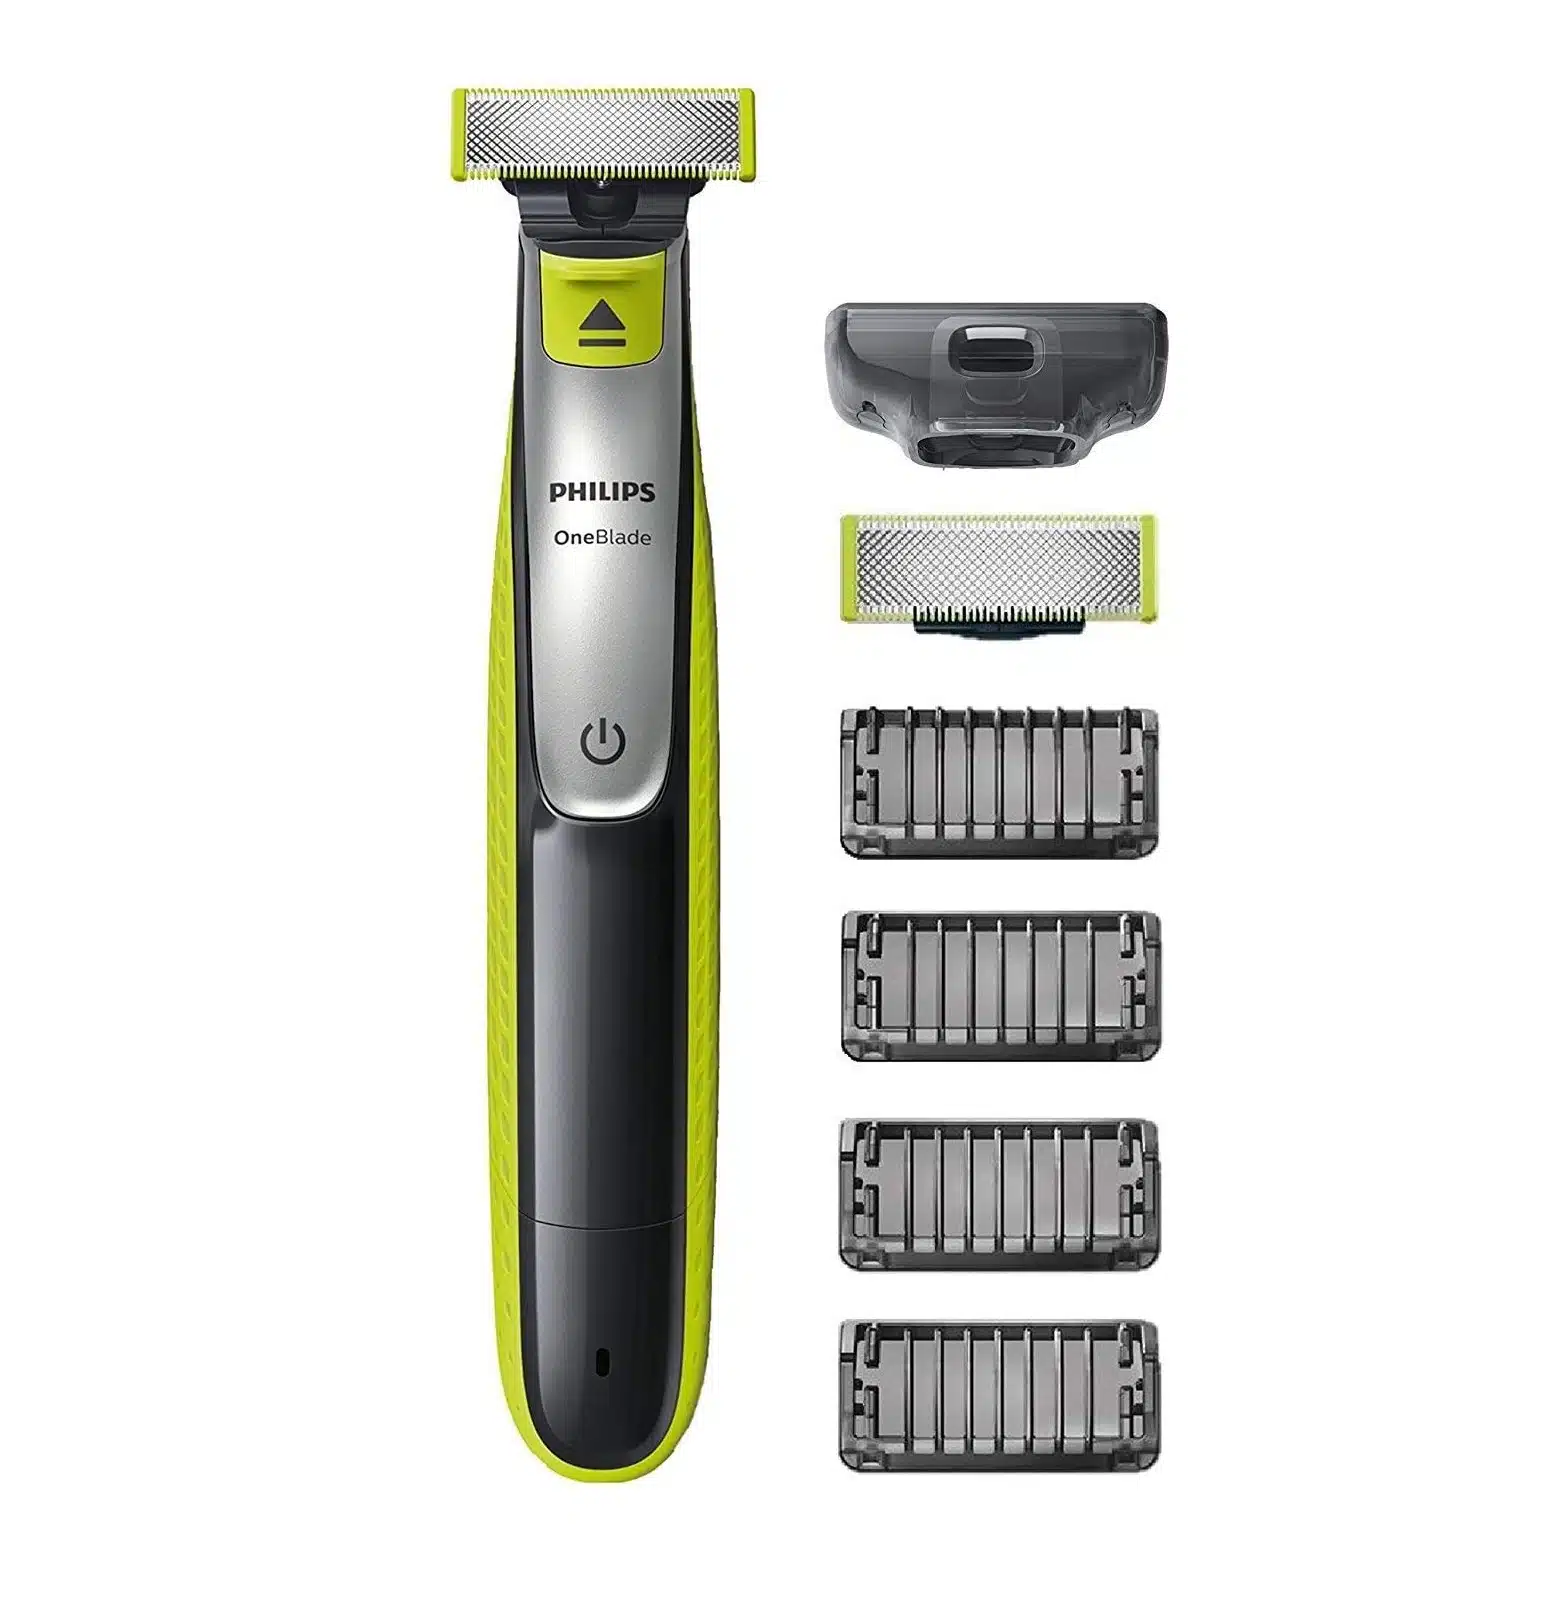 Meilleure tondeuse barbe 2022 - Philips OneBlade QP2530/30